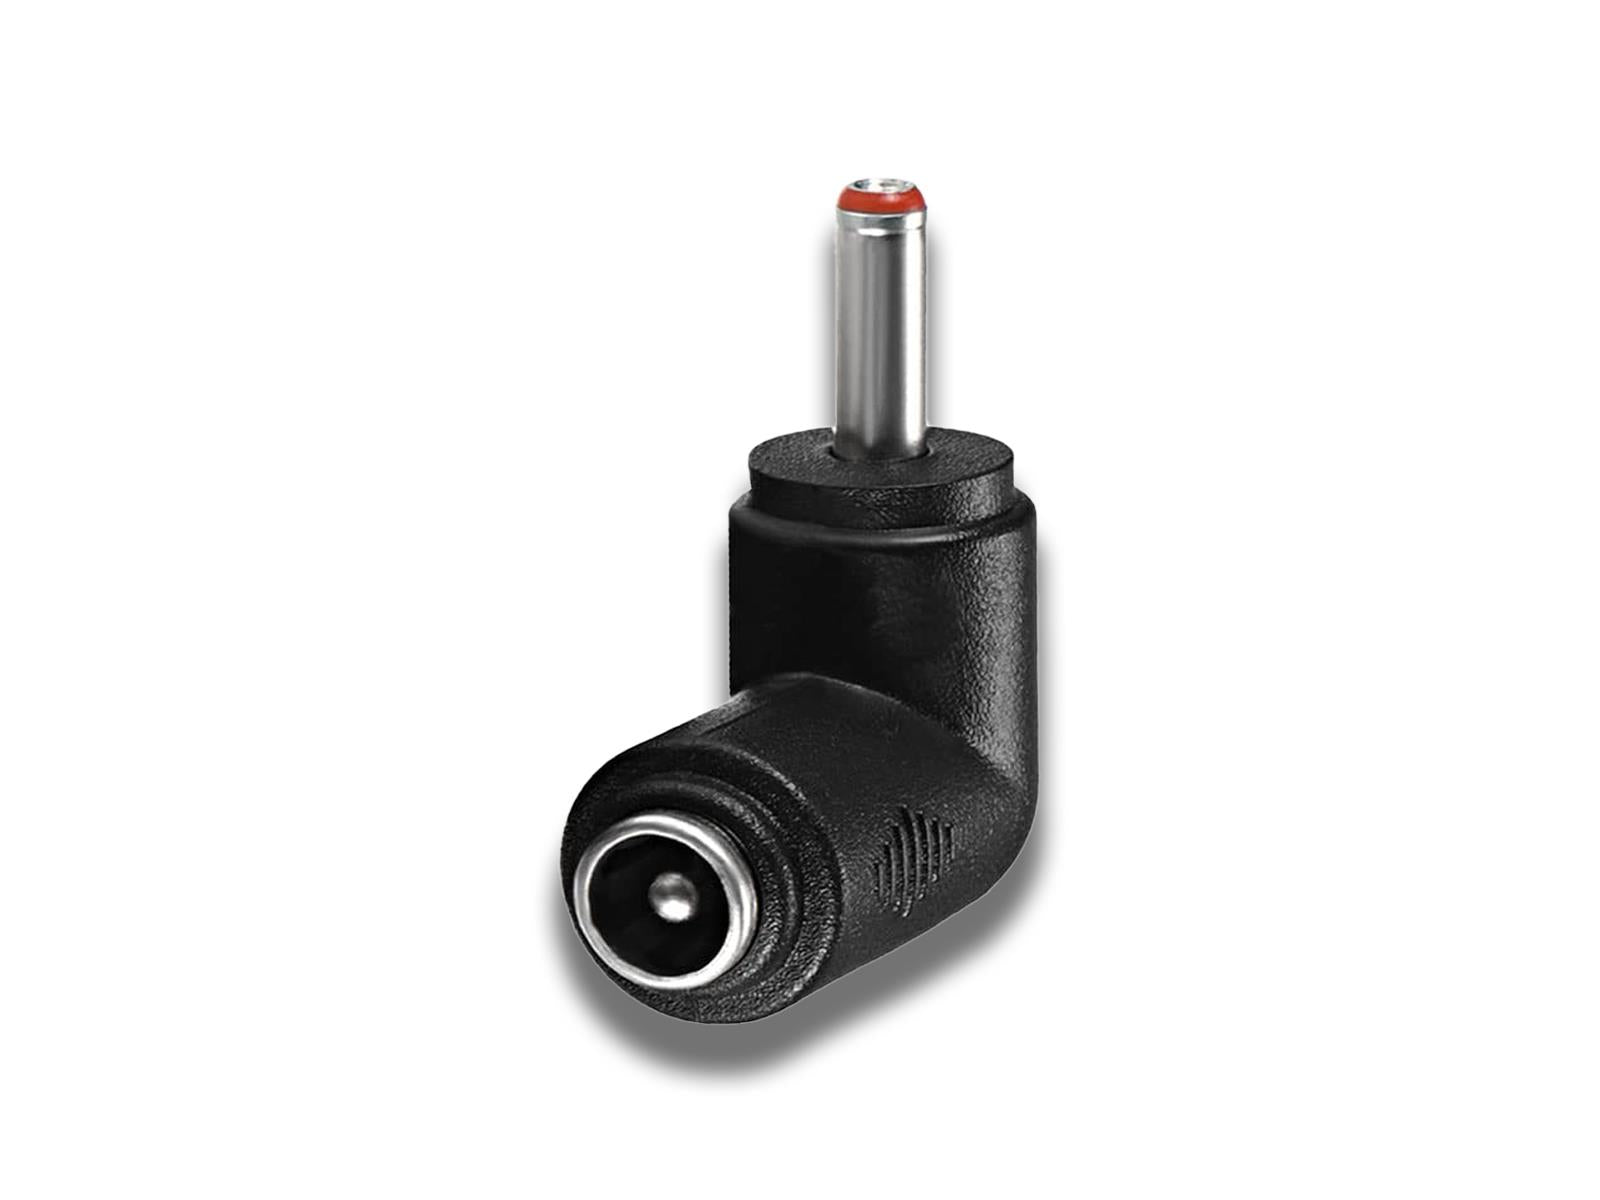 90 Degree DC Adapter (5.5 x 2.1mm to 3.5 x 1.35mm)